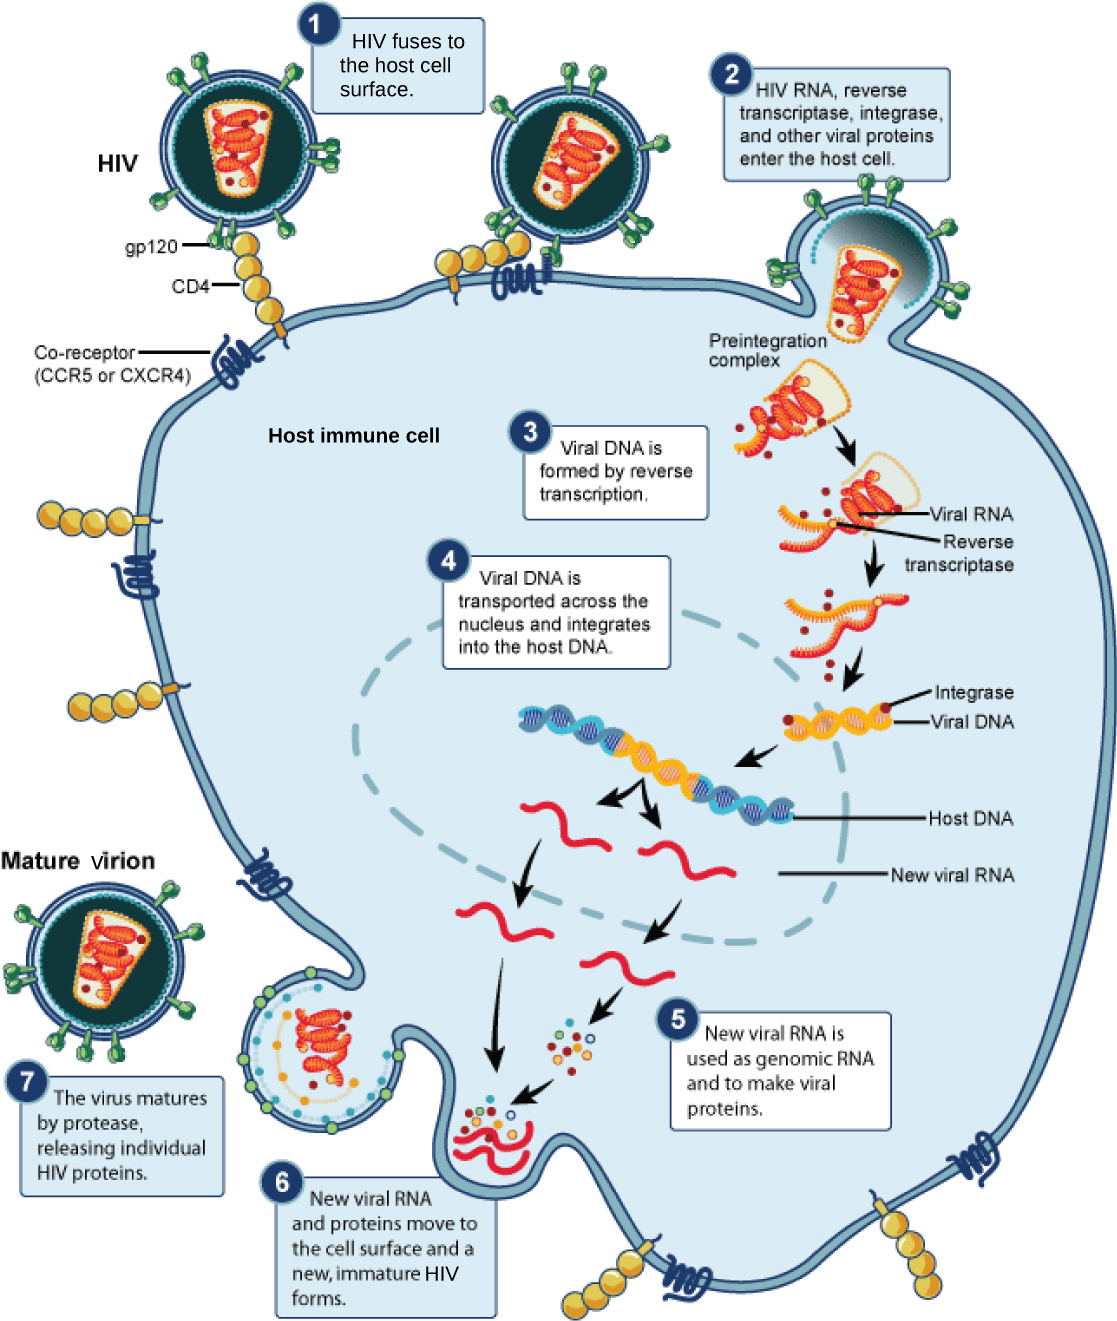 The illustration shows the steps in the H I V life cycle. In step 1, g p 120 glycoproteins in the viral envelope attach to a C D 4 receptor on the host cell membrane. The glycoproteins then attached to a co-receptor, C C R 5 or C X C R 4, and the viral envelope fuses with the cell membrane. H I V, R N A, reverse transcriptase, and other viral proteins are released into the host cell. Viral D N A is formed from R N A by reverse transcriptase. Viral D N A is then transported across the nuclear membrane, where it integrates into the host D N A. New viral R N A is made; it is used as genomic R N A and to make viral proteins. New viral R N A and proteins move to the cell surface and a new, immature H I V forms. The virus matures when a protease releases individual H I V proteins.